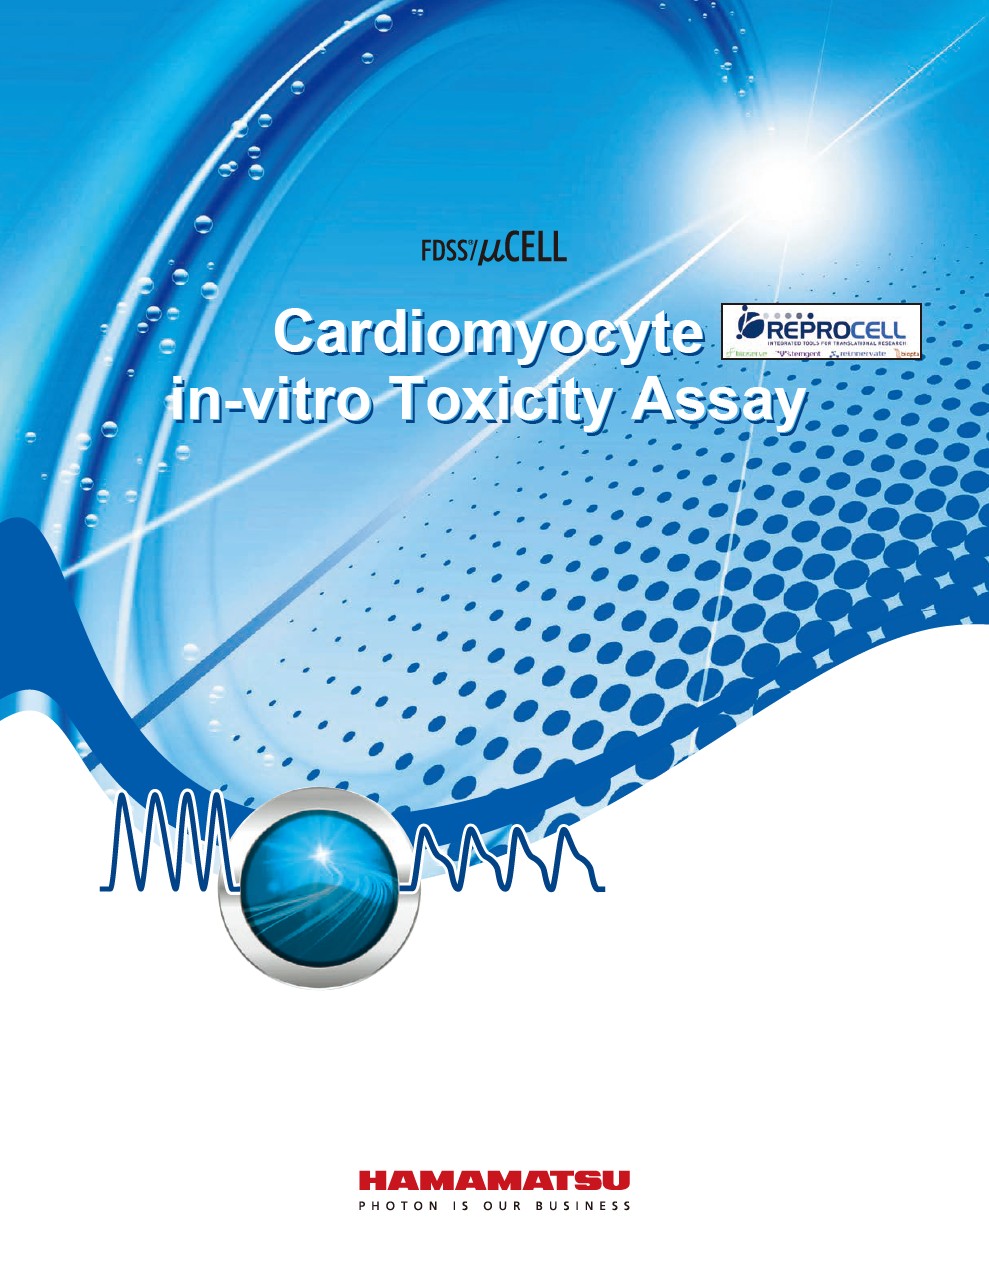 FDSS/μCELL Cardiomyocyte in-vitro Toxicity Assay [ReproCELL ver.]